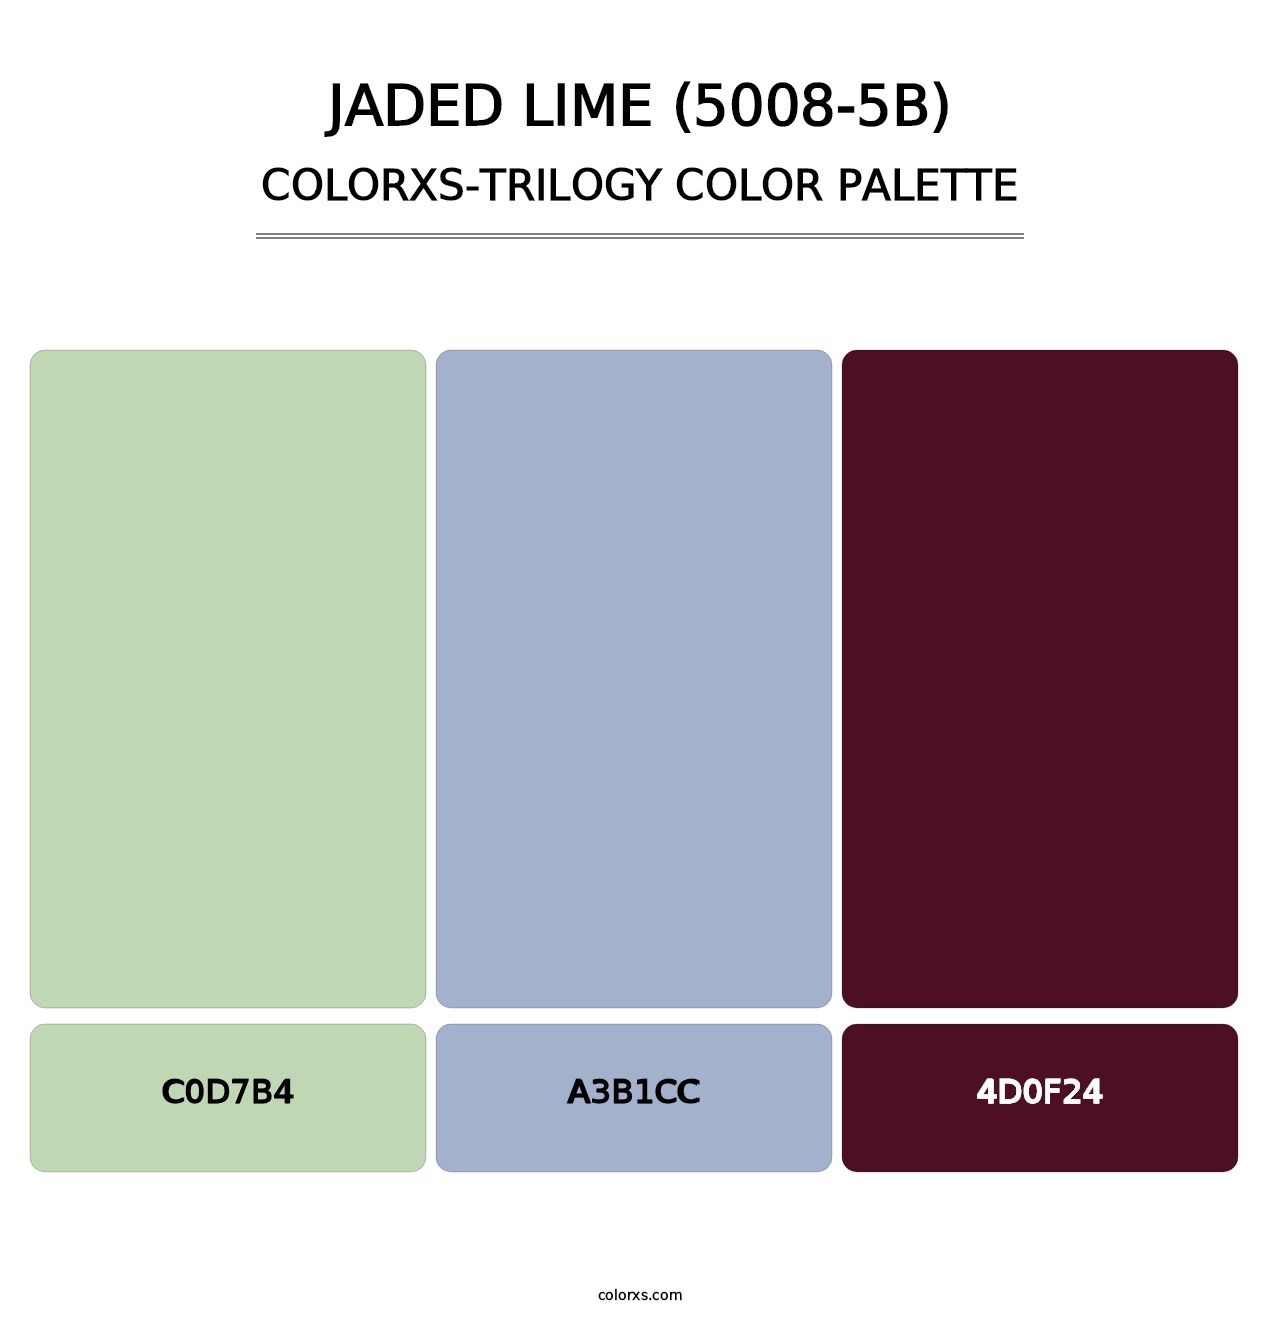 Jaded Lime (5008-5B) - Colorxs Trilogy Palette